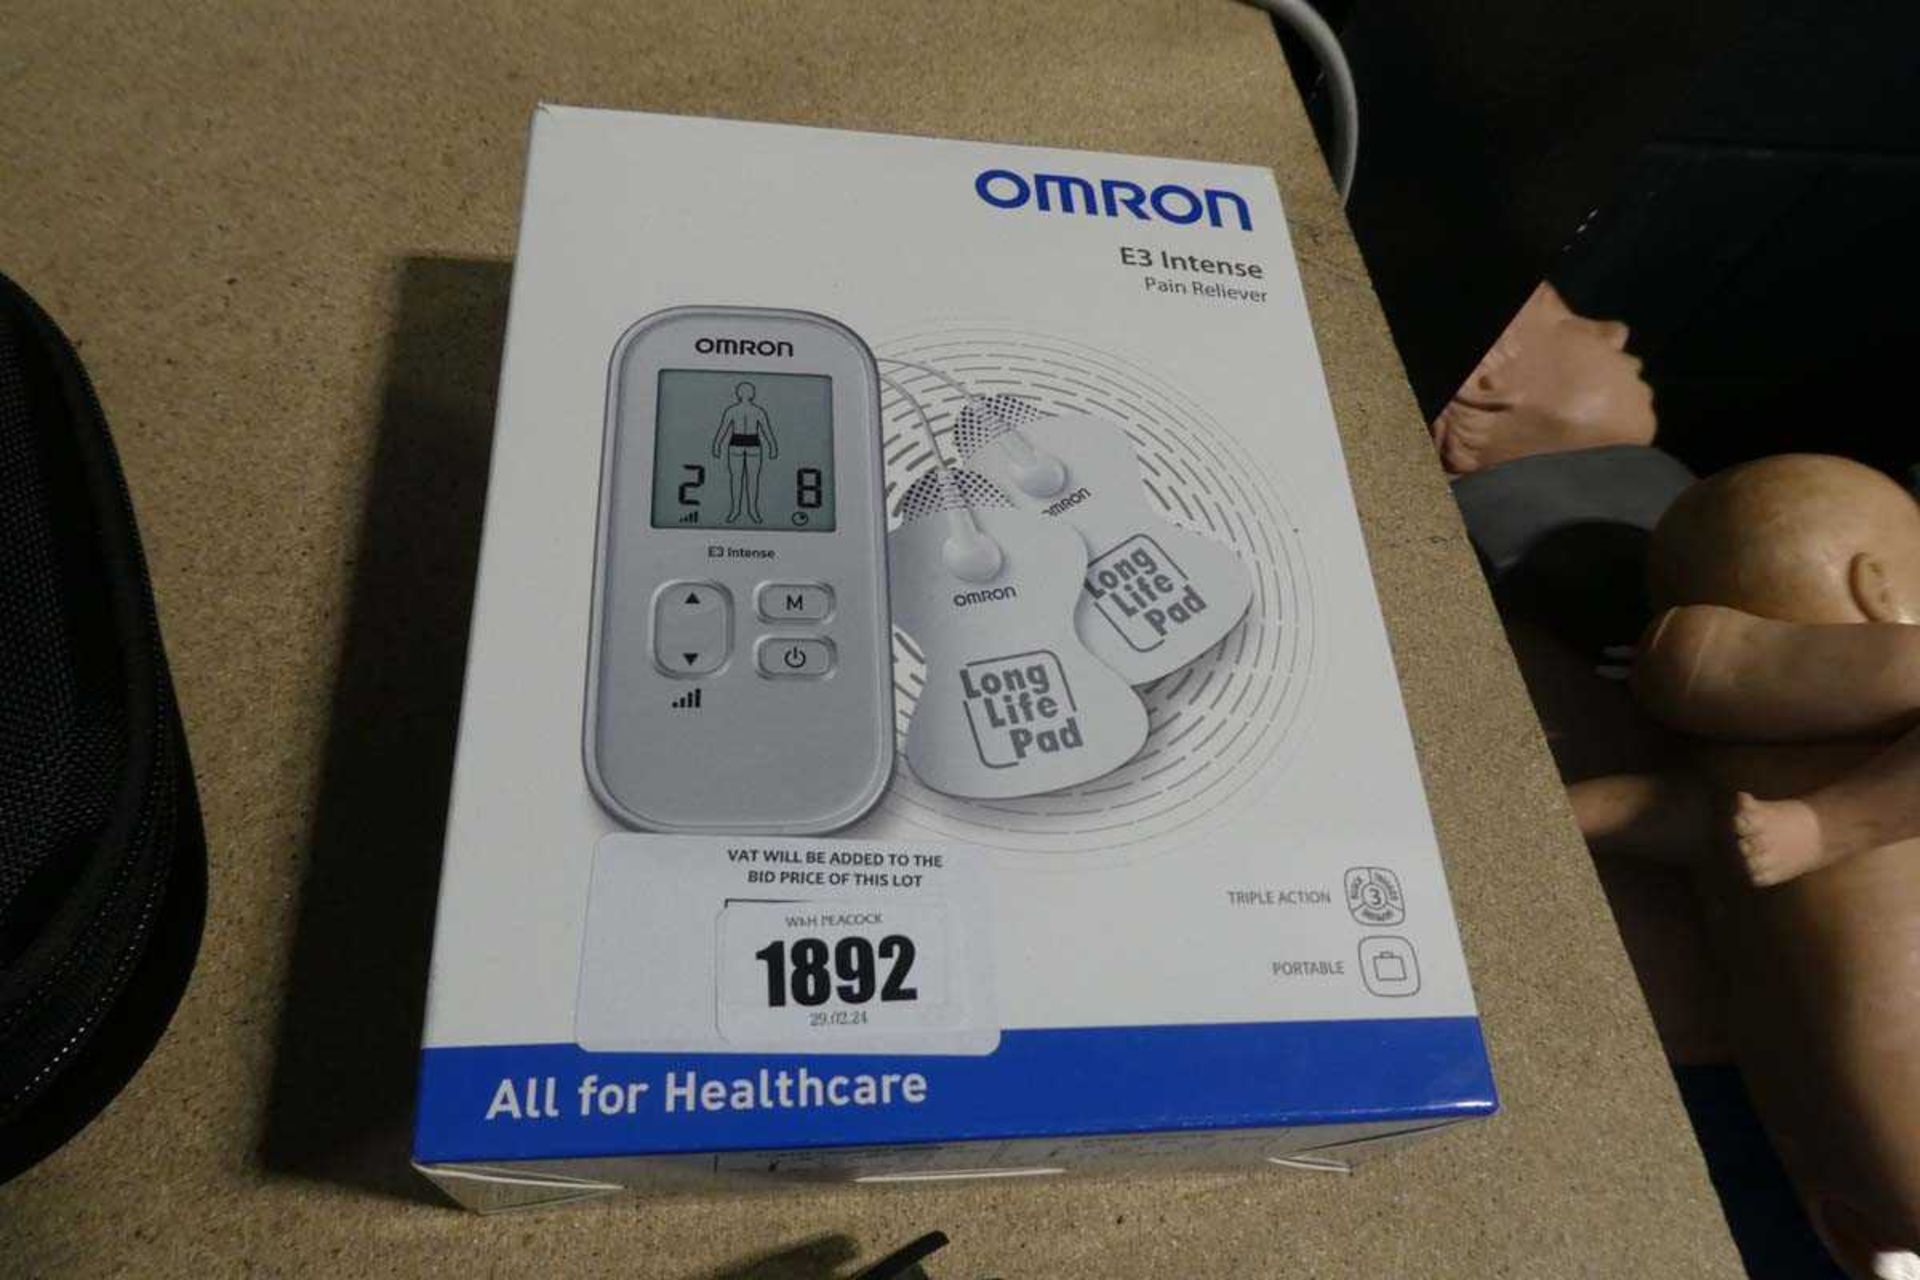 +VAT Omron E3 intense pain reliever